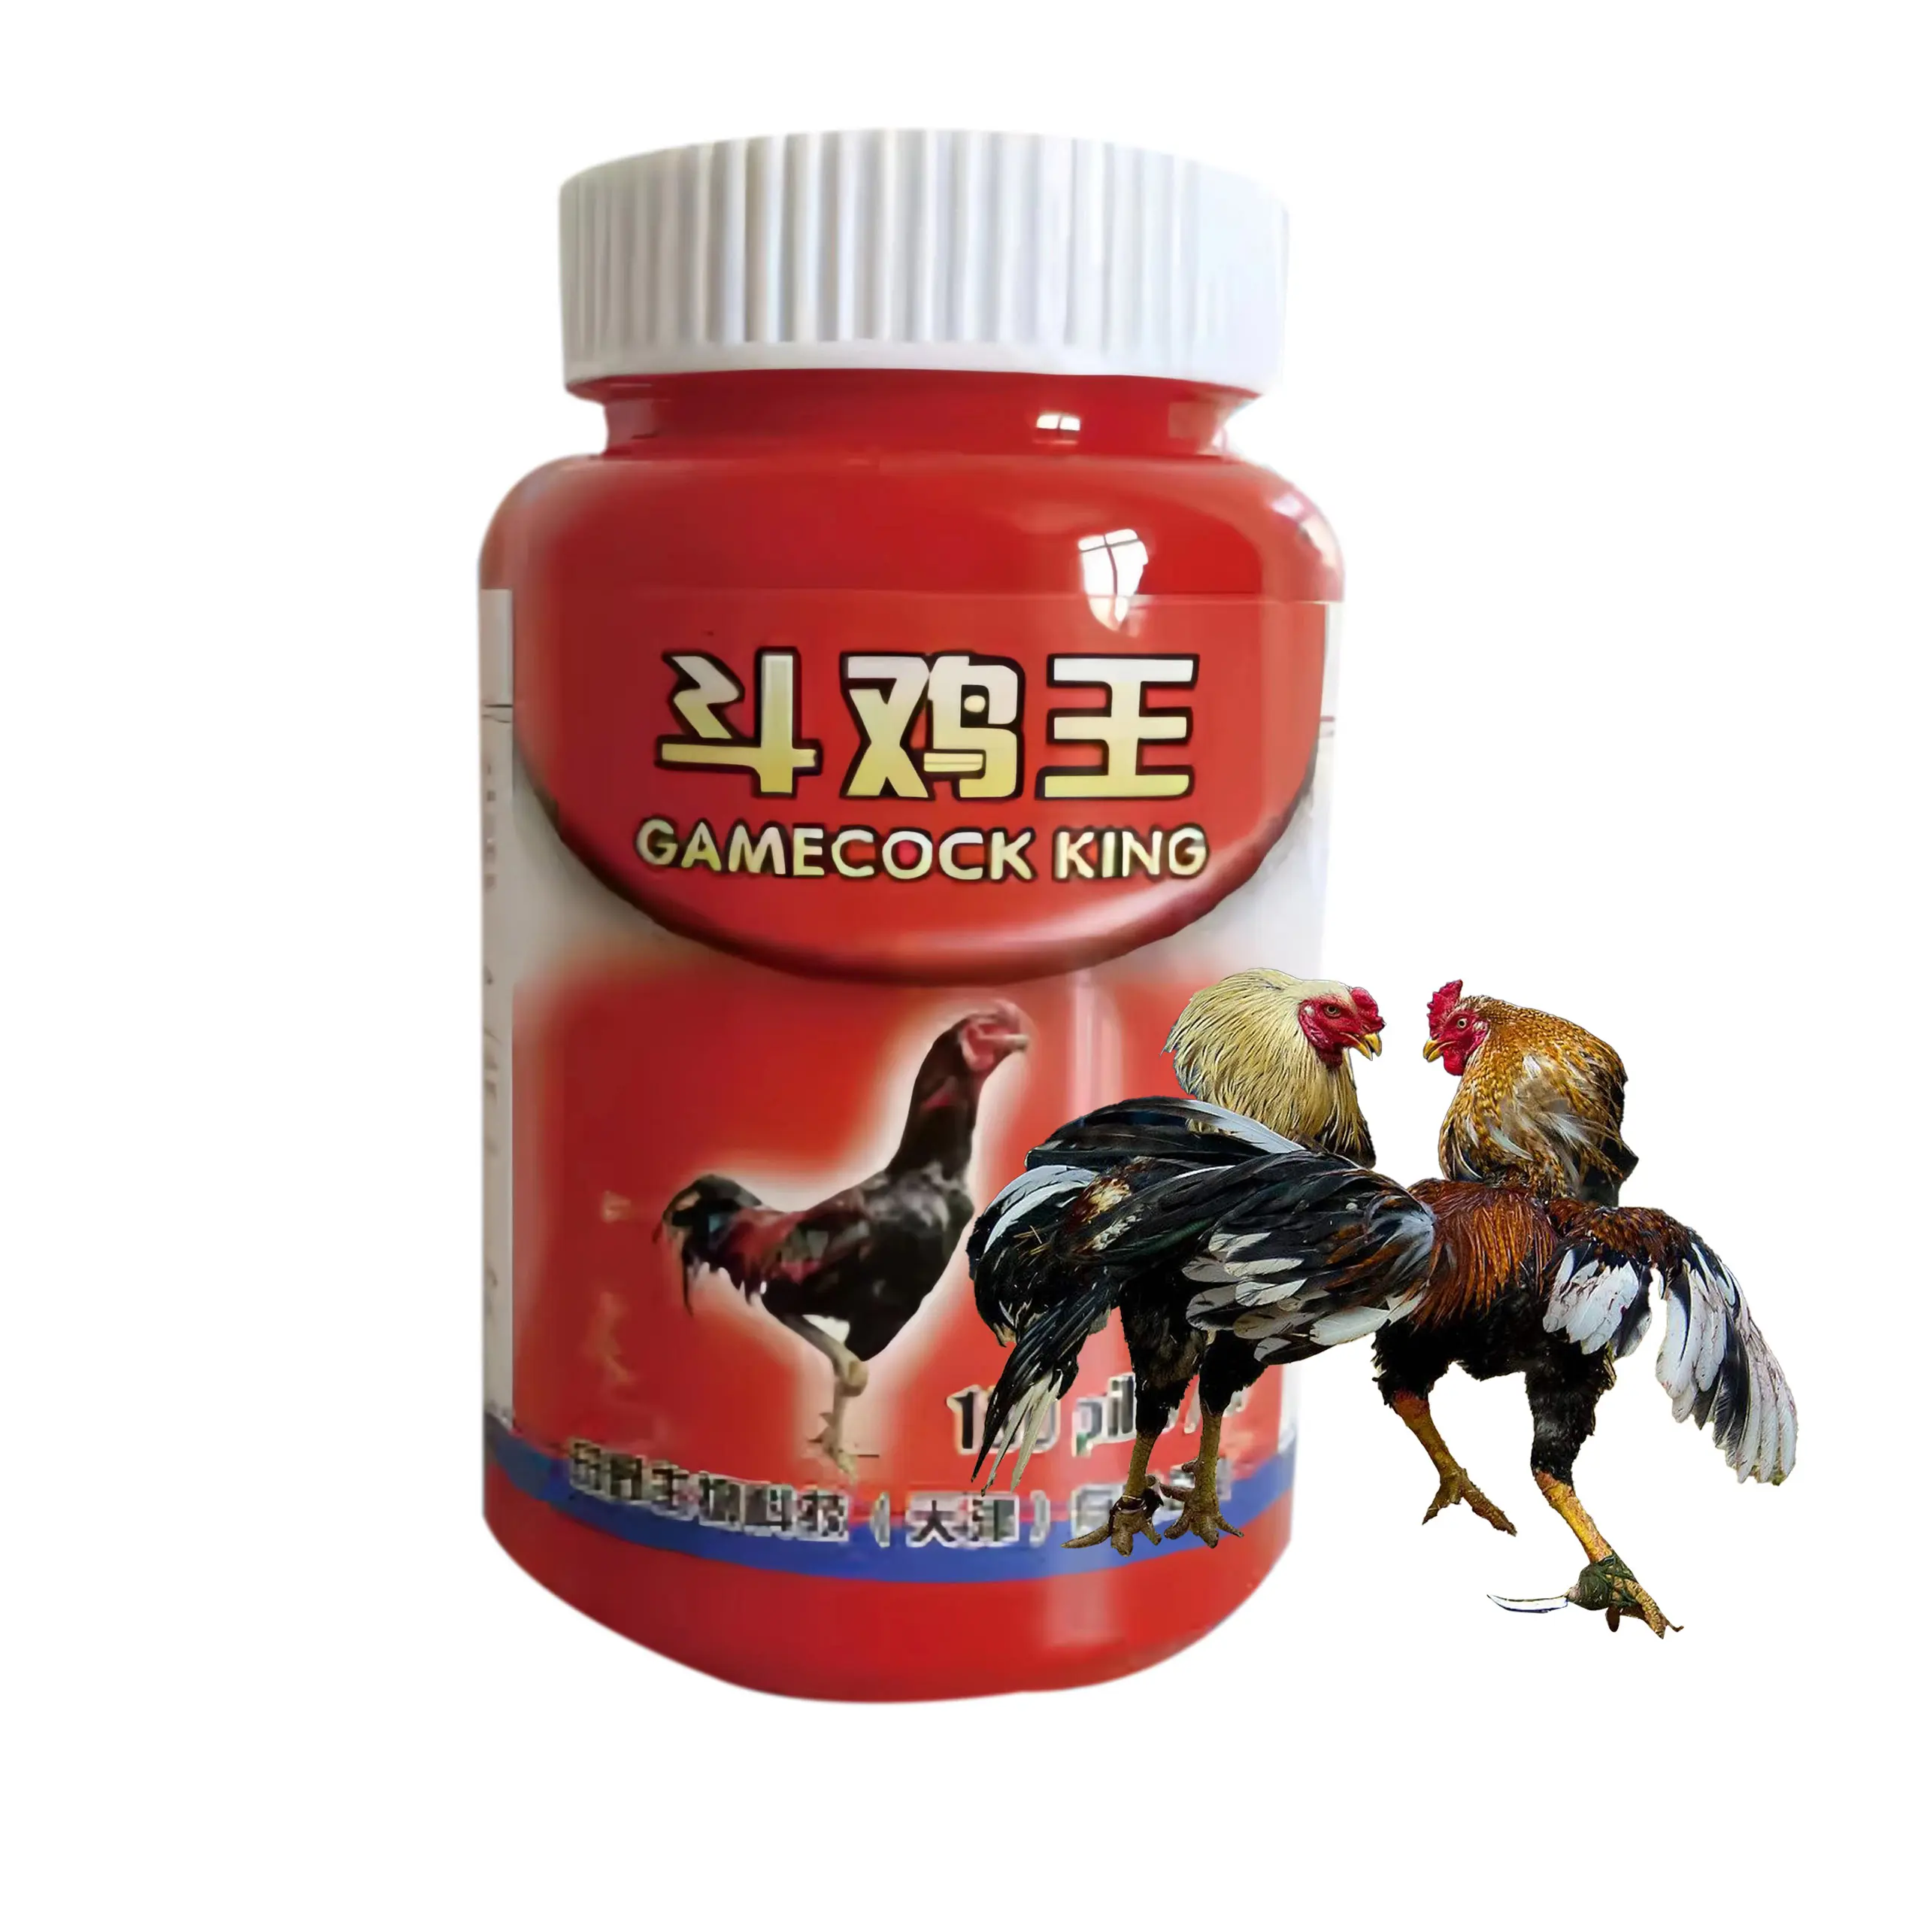 Gamefowl rooster product suppliments for fighting roosters supplement filipino supplement for roosters fighting cocks